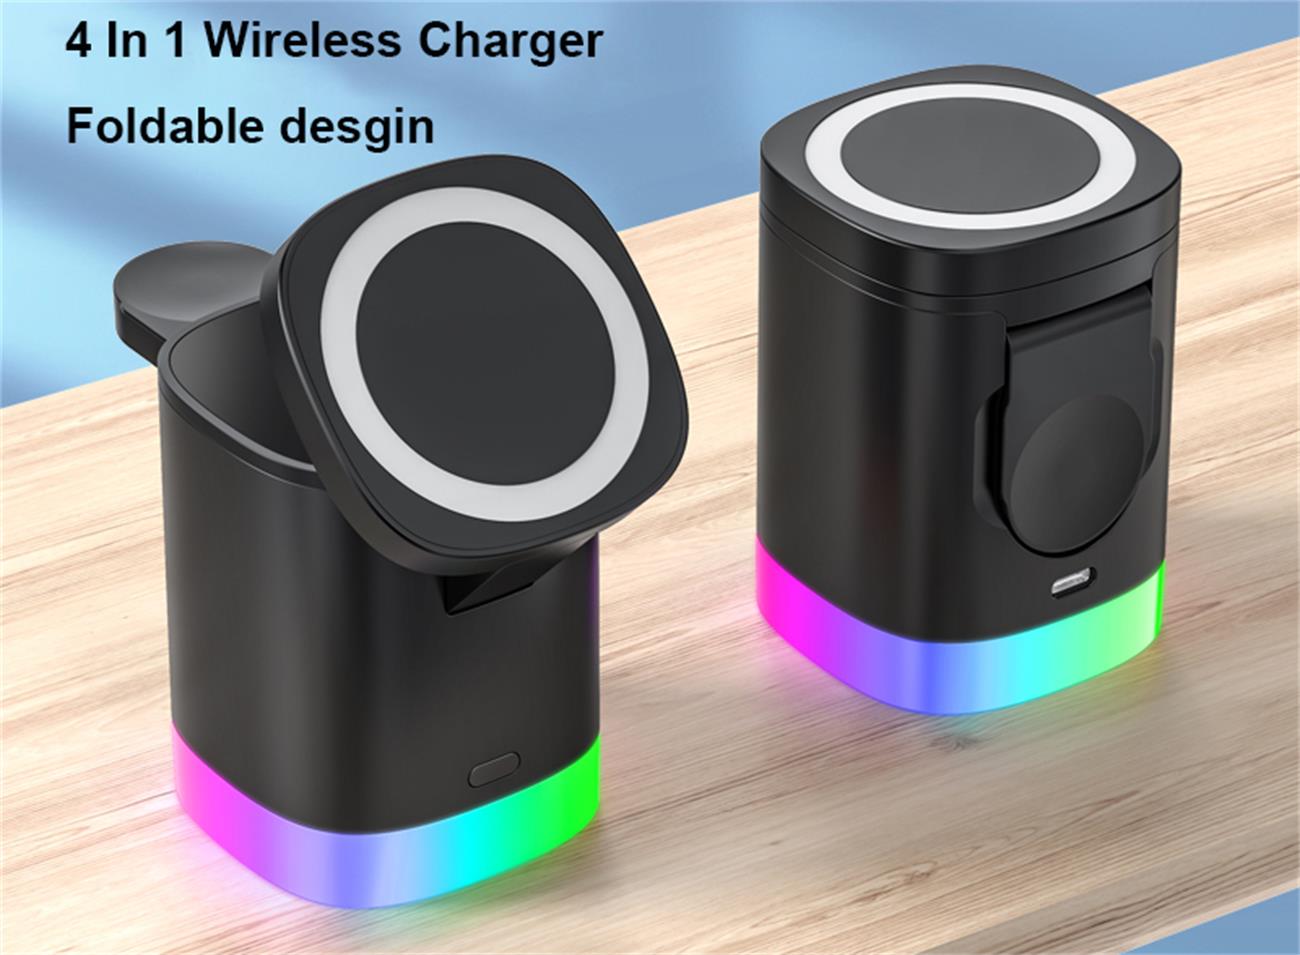 Magnetic Wireless Charger Foldable 4 In 1 Multifunction For Apple And Samsung Phone Watch Earpod